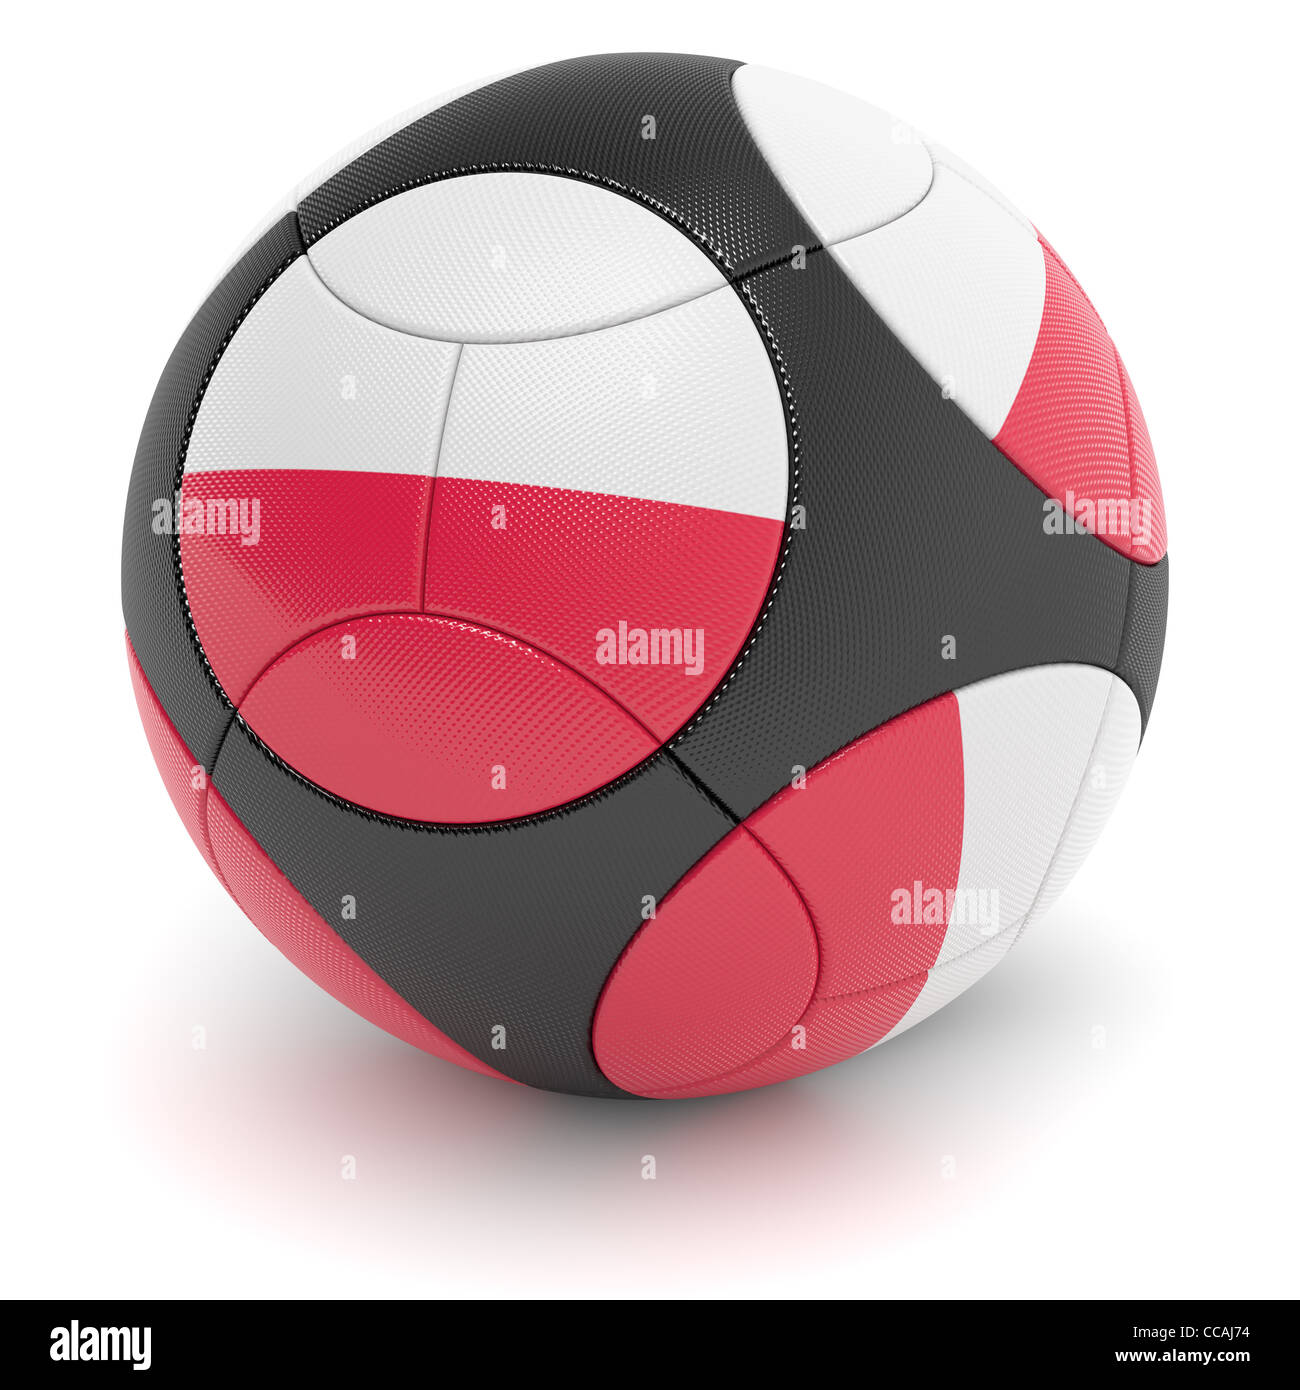 Soccer match ball of the 2012 European Championship with the flag of Poland - clipping path included Stock Photo